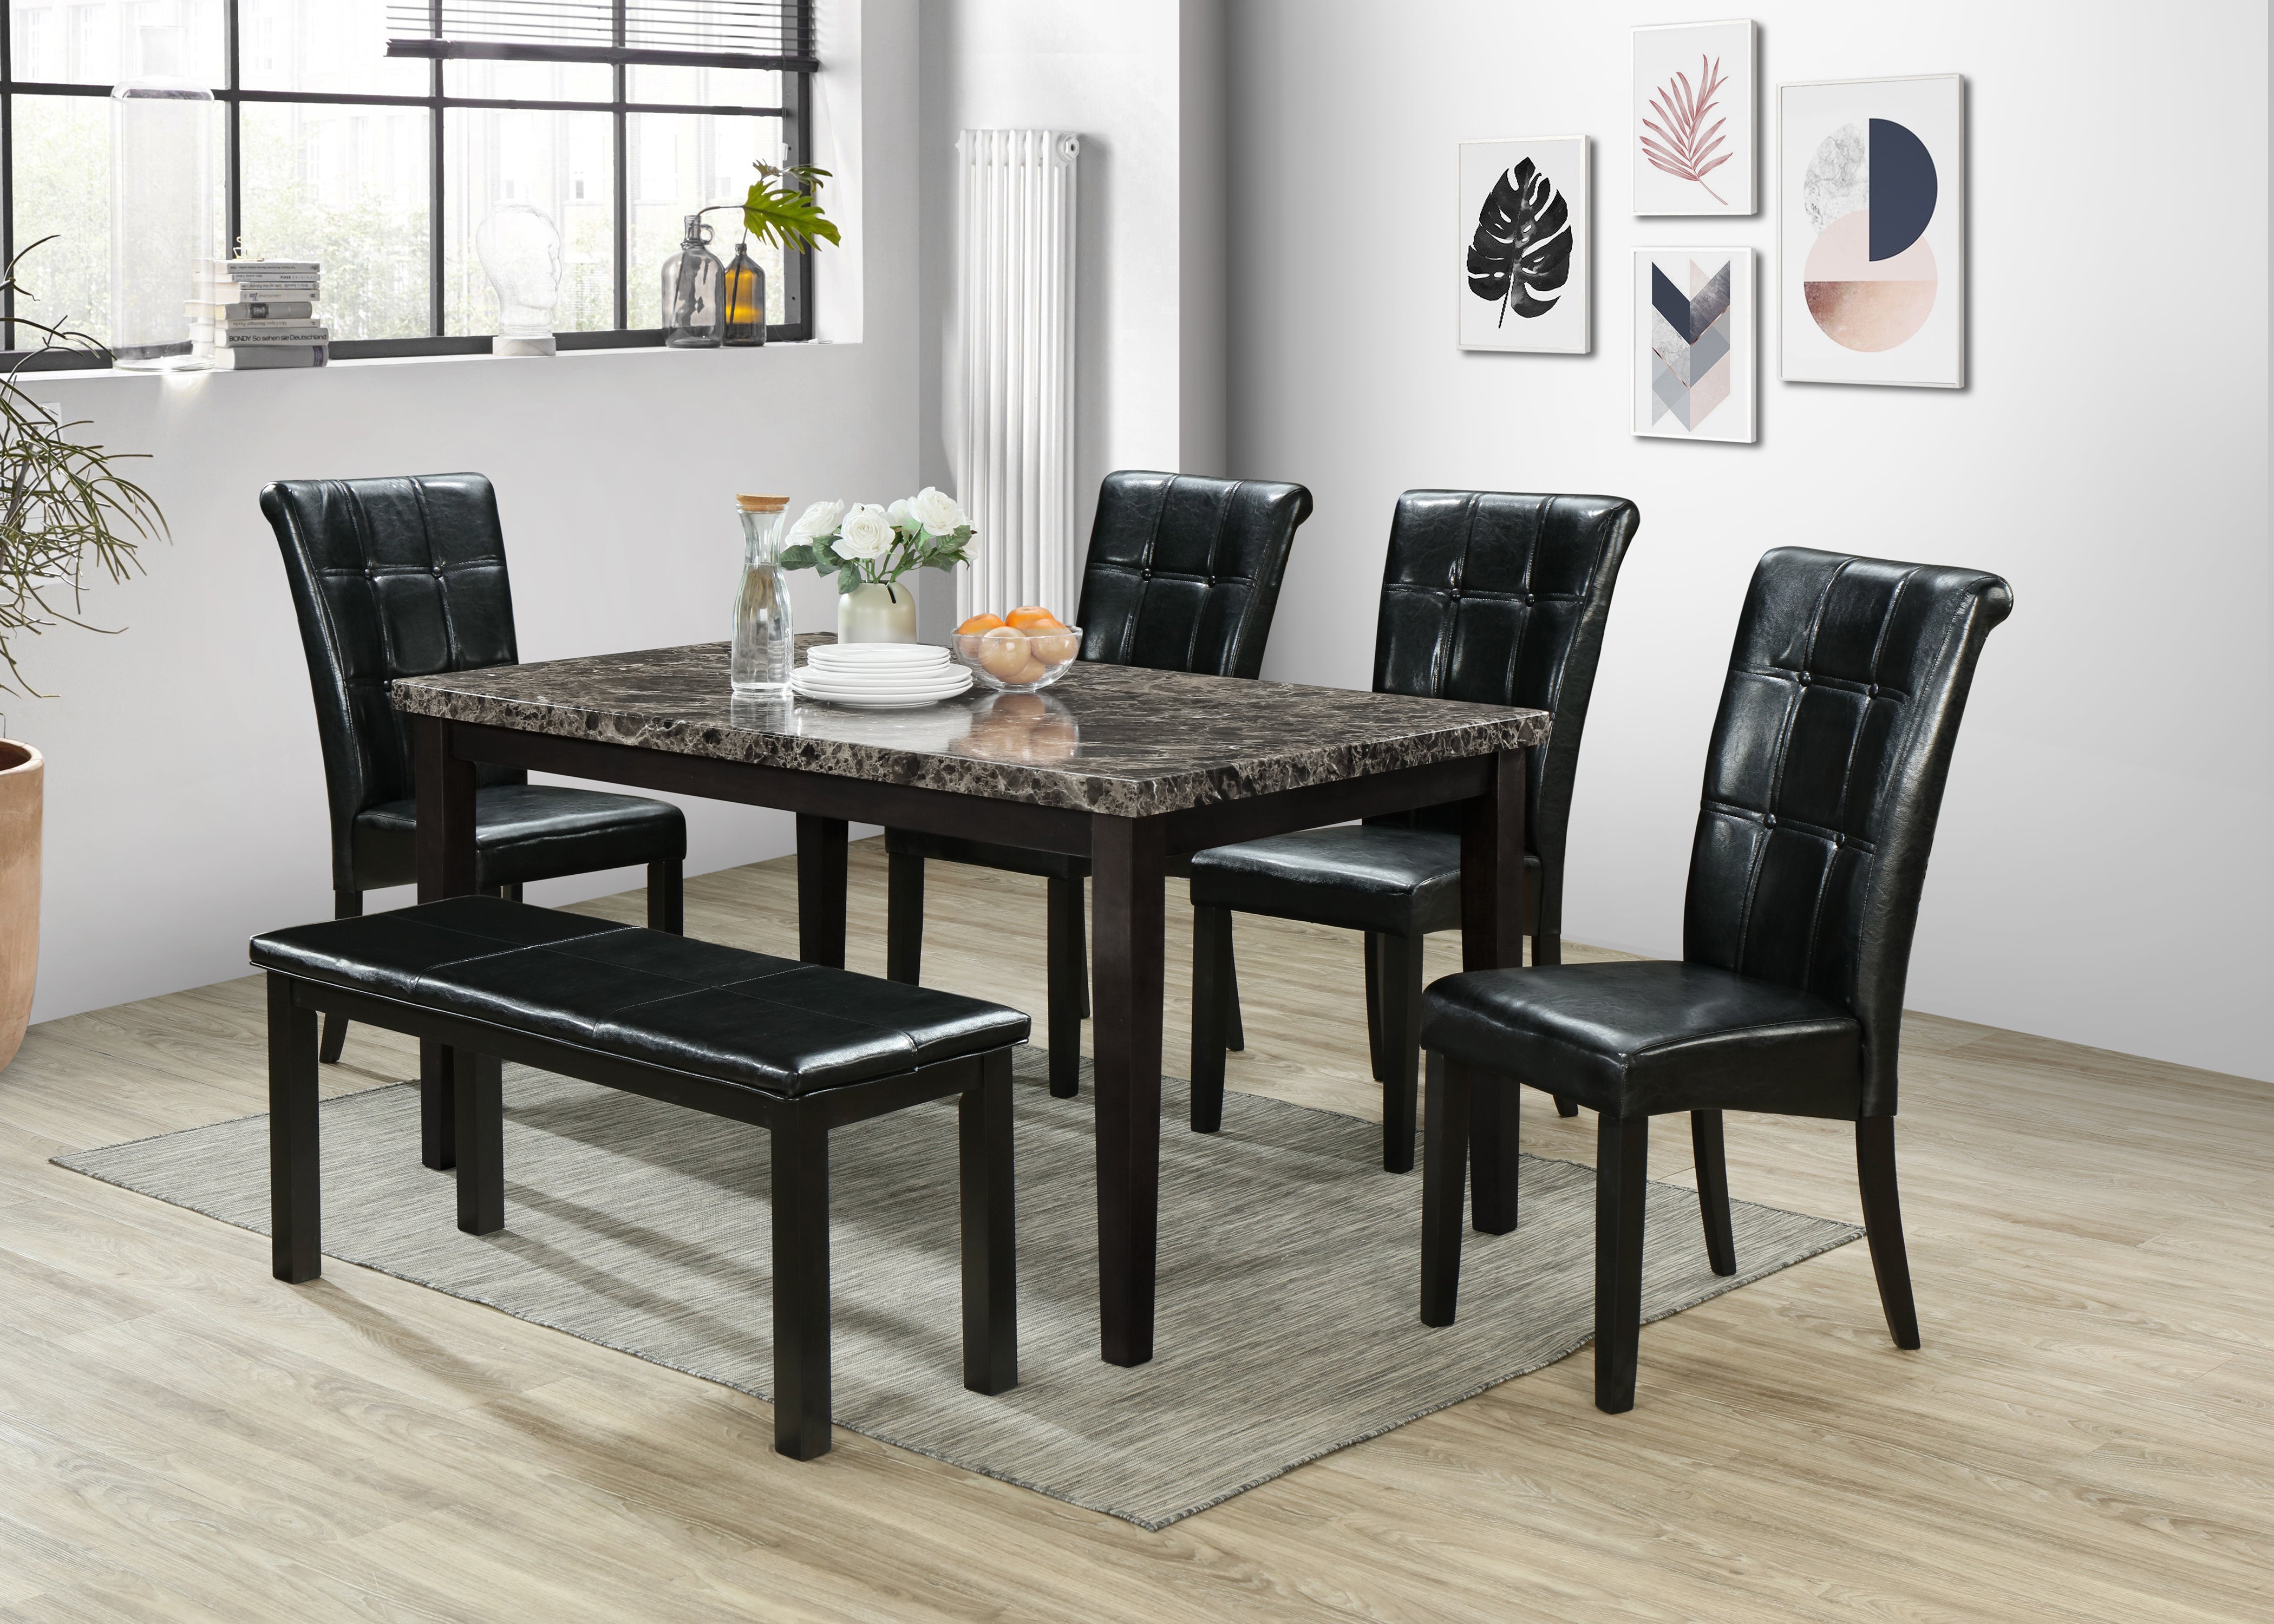 black kitchen dining table